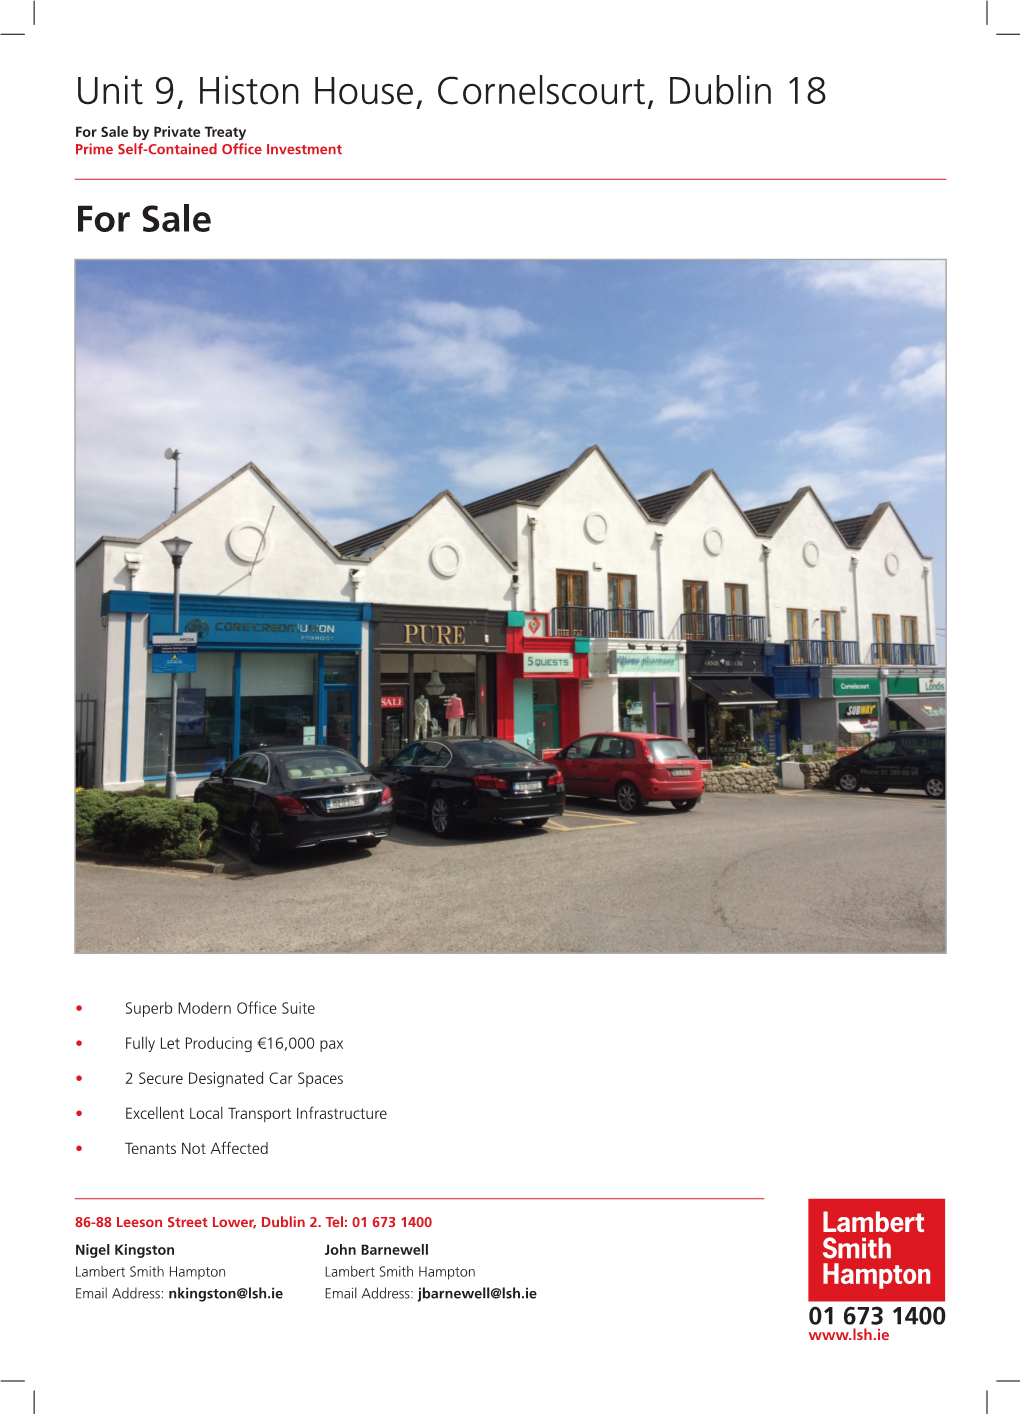 Unit 9, Histon House, Cornelscourt, Dublin 18 for Sale by Private Treaty Prime Self-Contained Office Investment